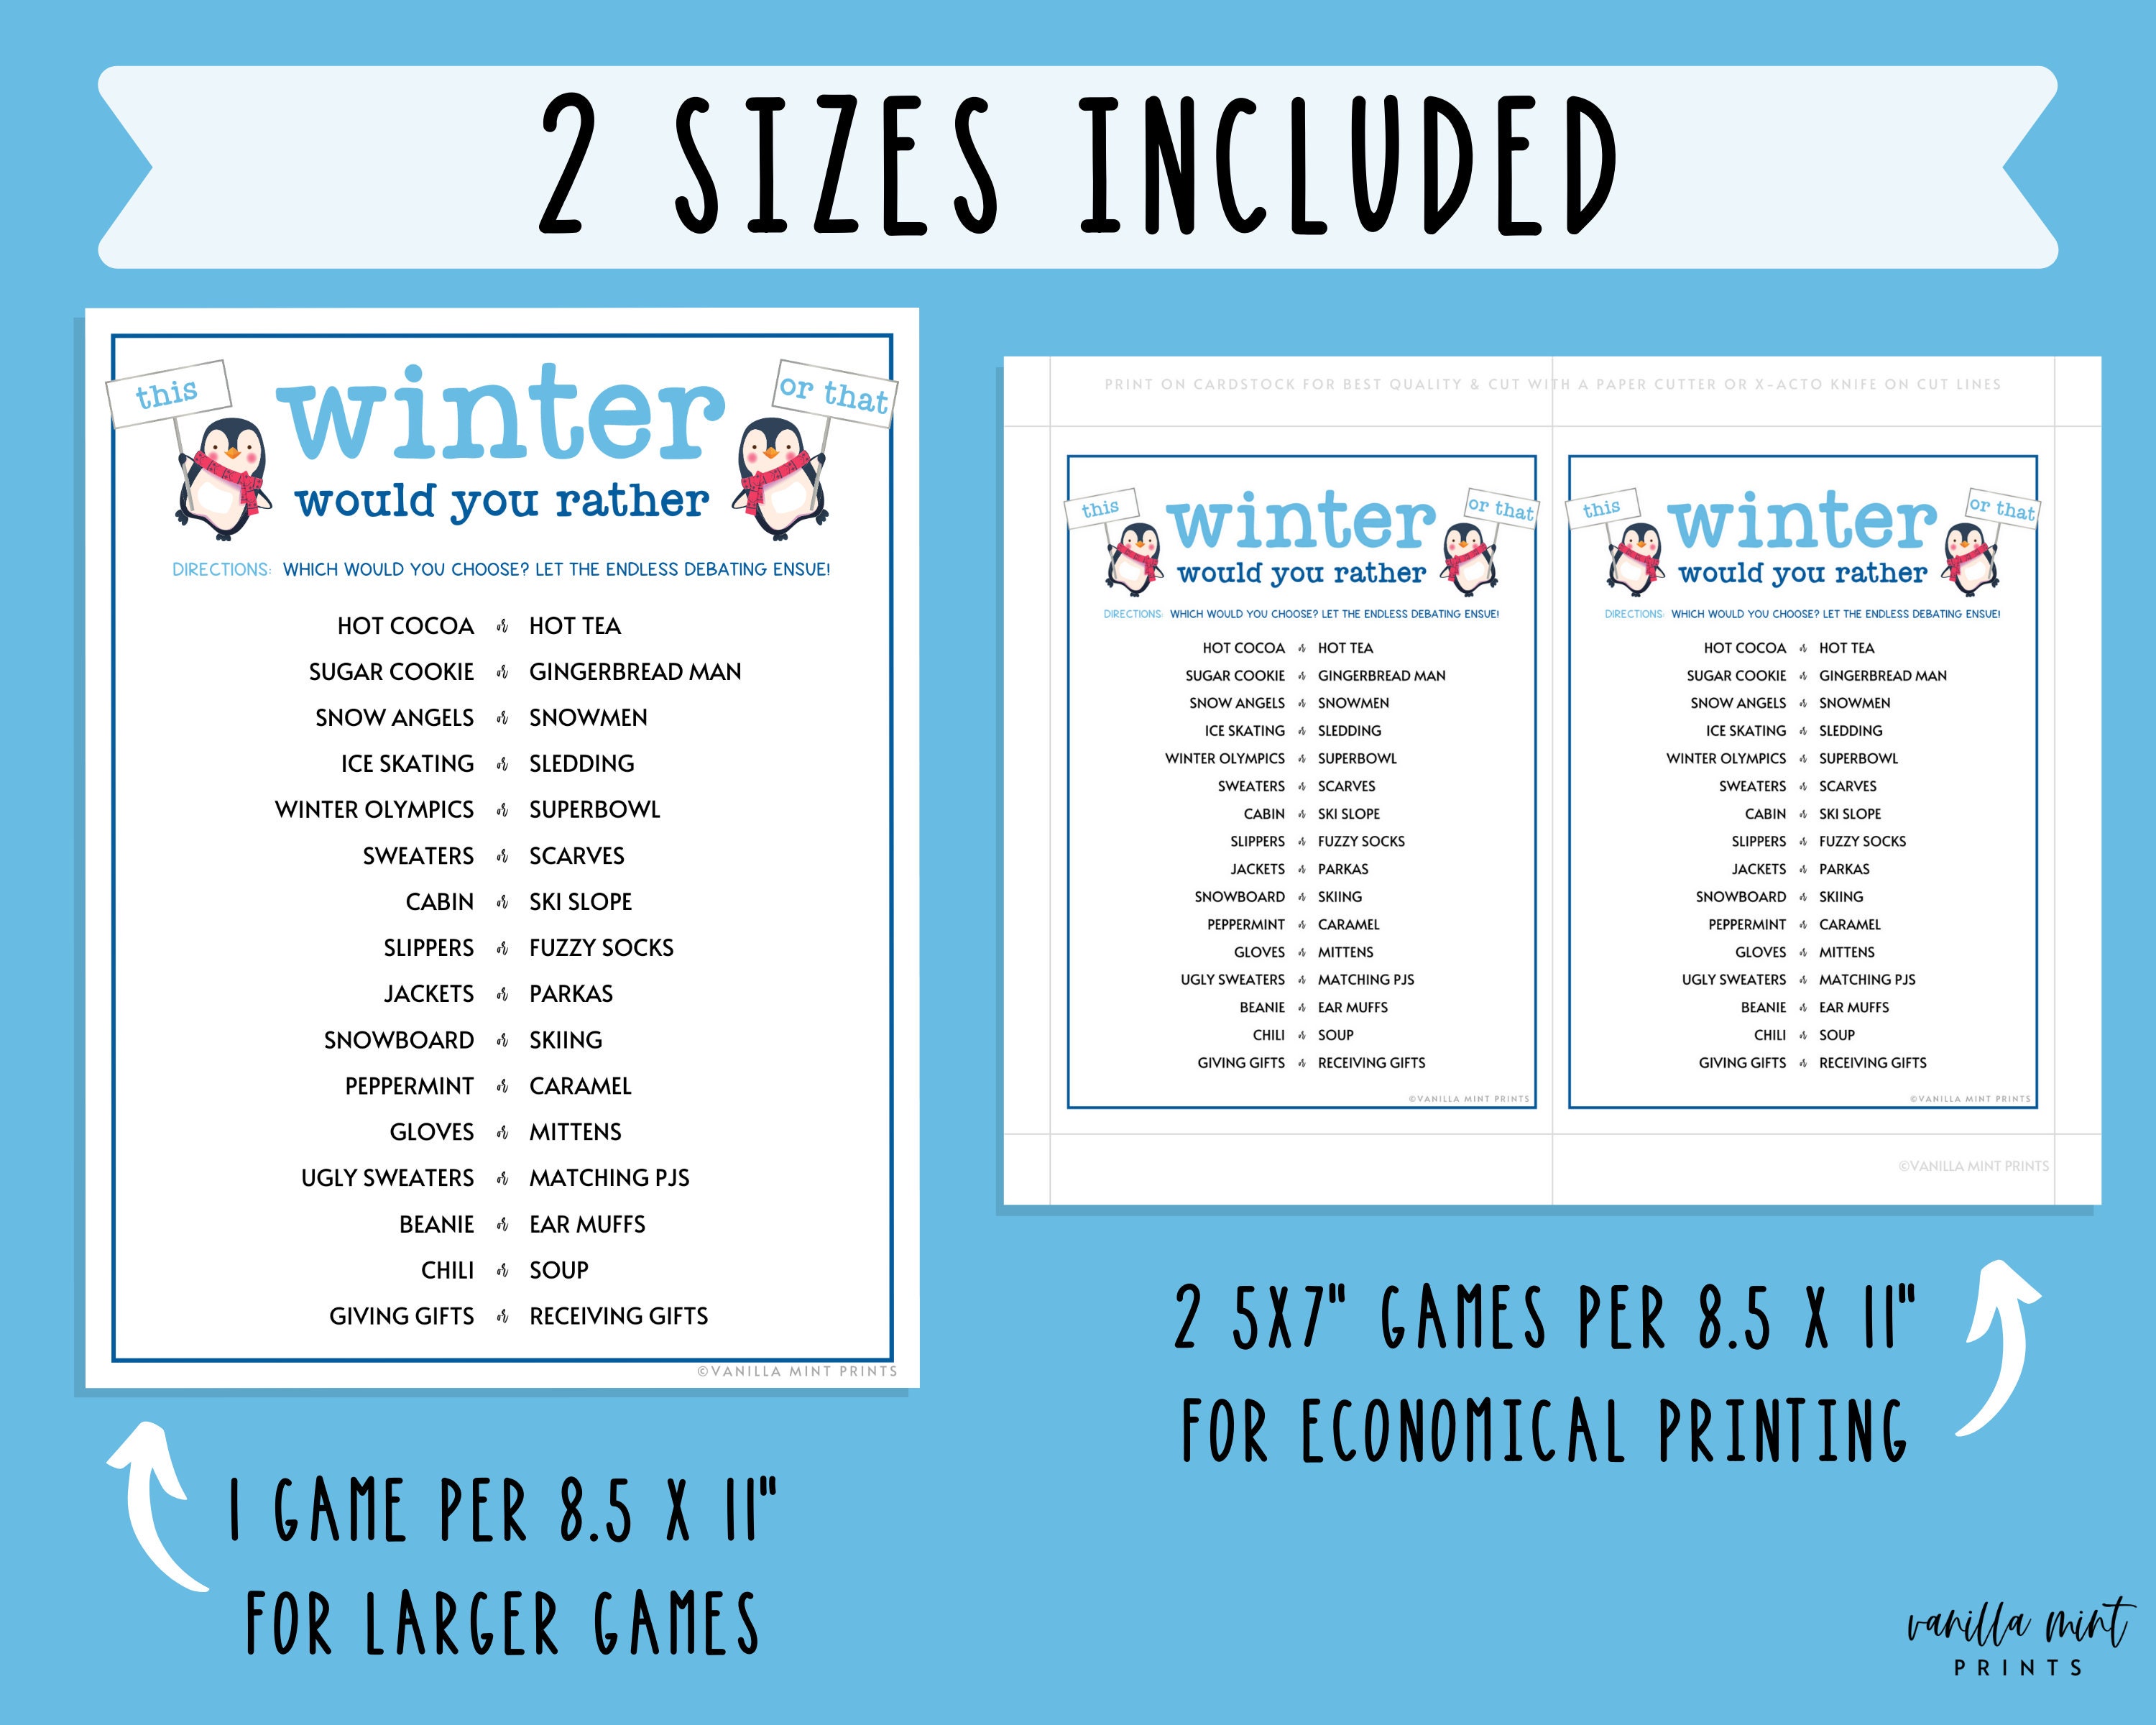 50 Winter Would You Rather (Free Printables) - The Best Ideas for Kids